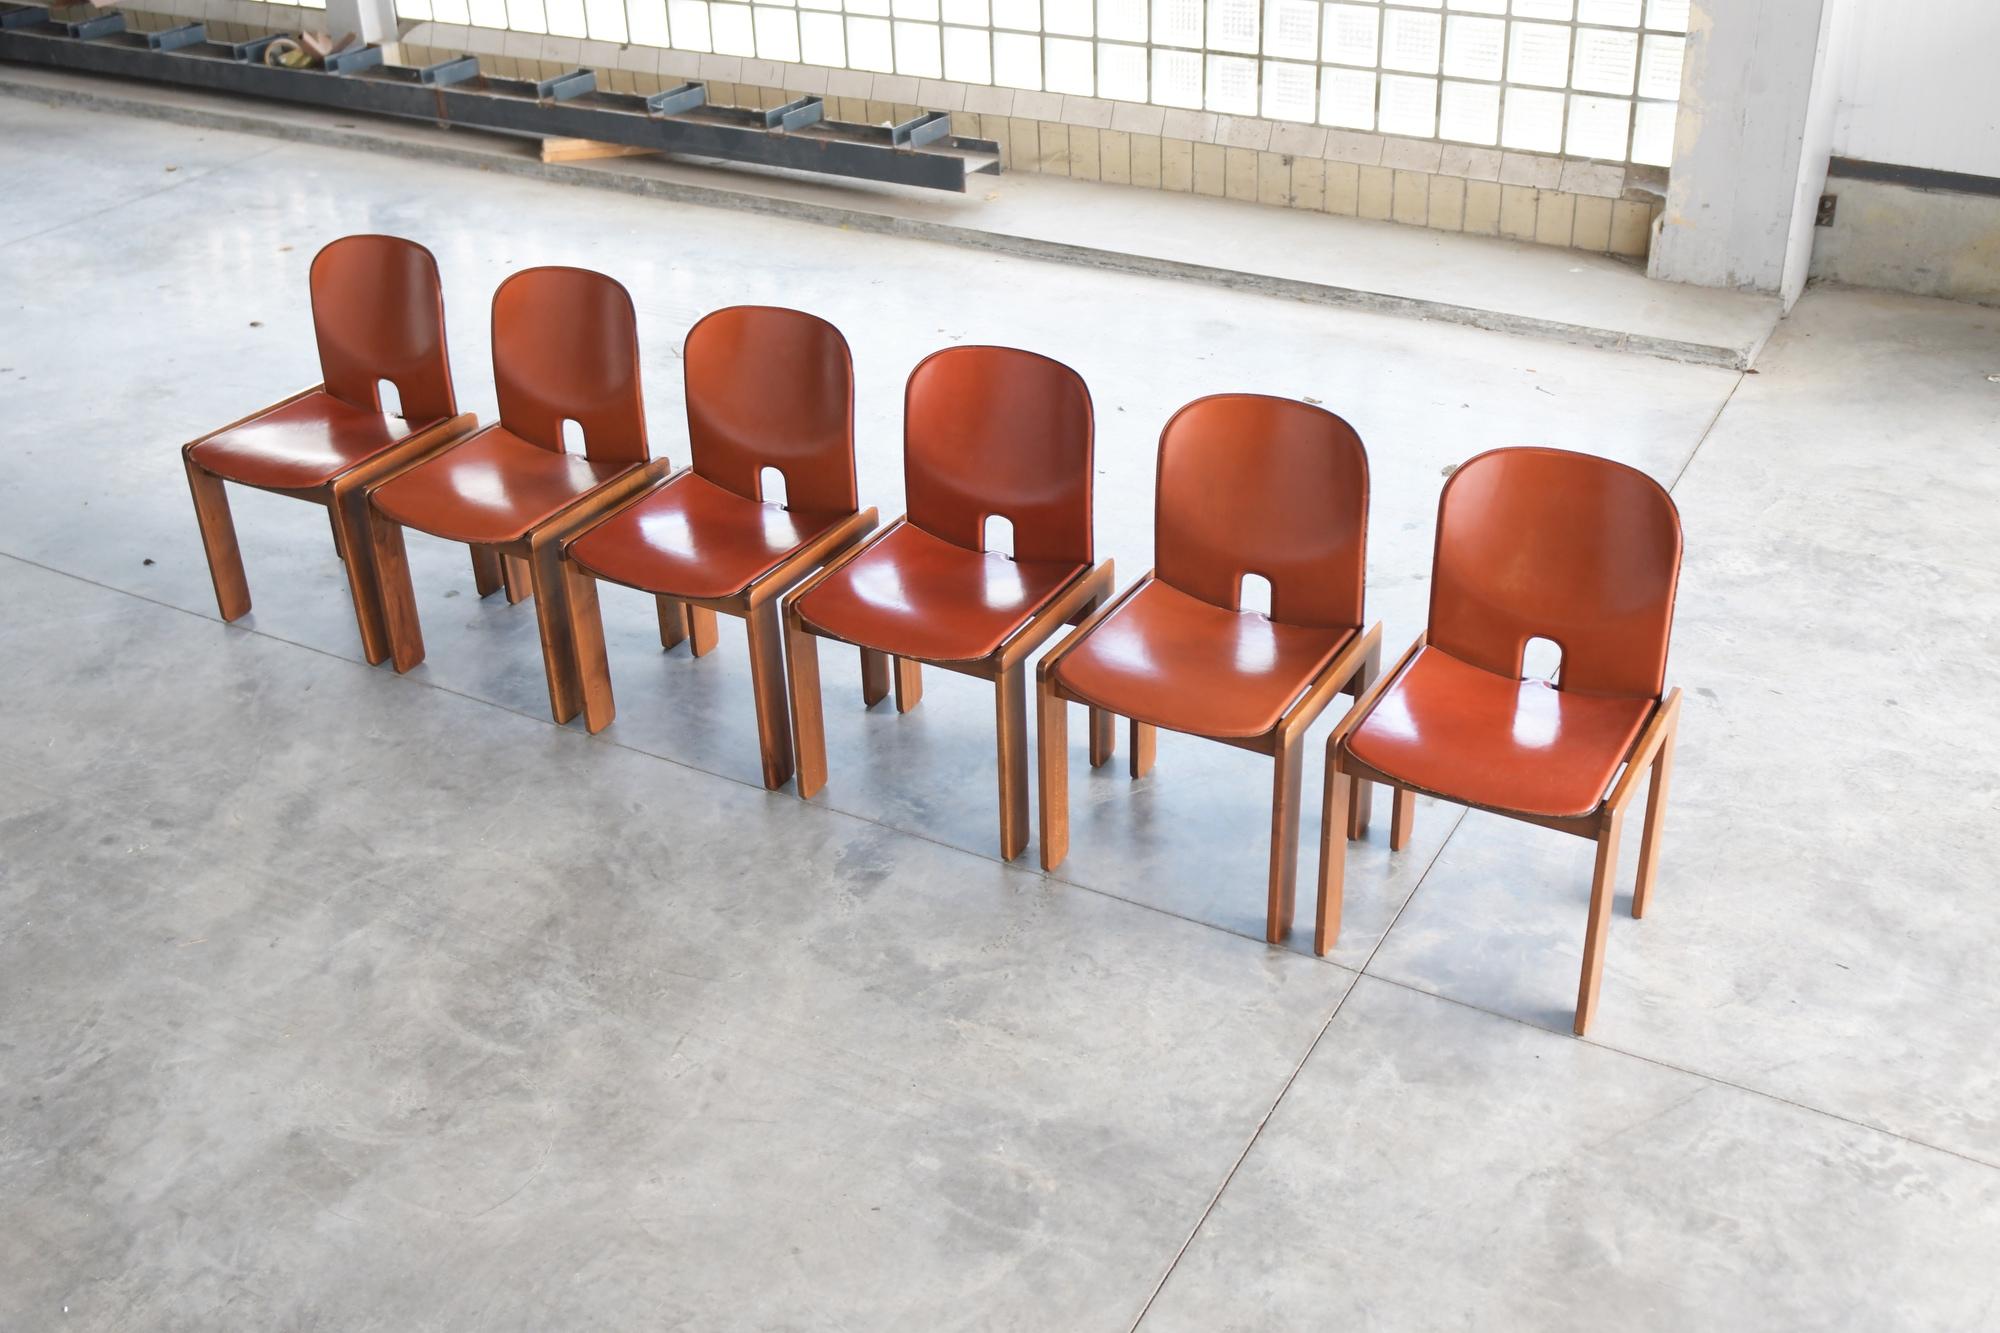 Nice set of 6 ‘121 dining chairs’ designed by Afra & Tobia Scarpa and manufactured by Cassina, Italy 1965. 
These chairs have walnut wooden frames and are covered with cognac/orange colored leather. Chairs are marked with the Cassina sticker.

A